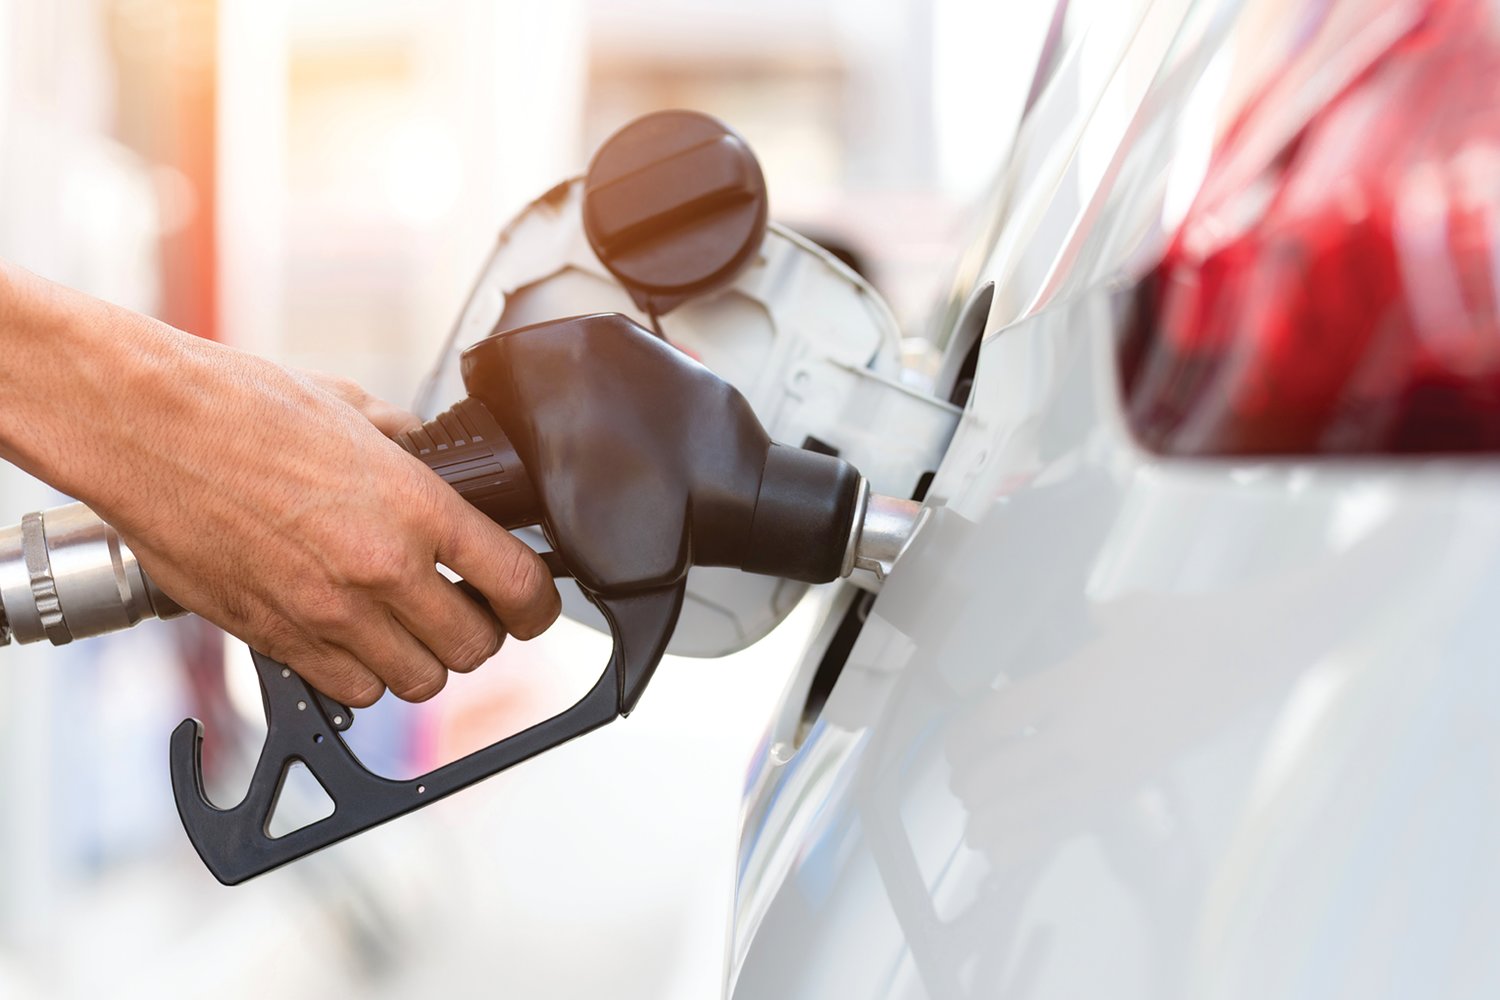 New York’s average gas price is up 15 cents from last week, averaging $5.03 per gallon across the state.